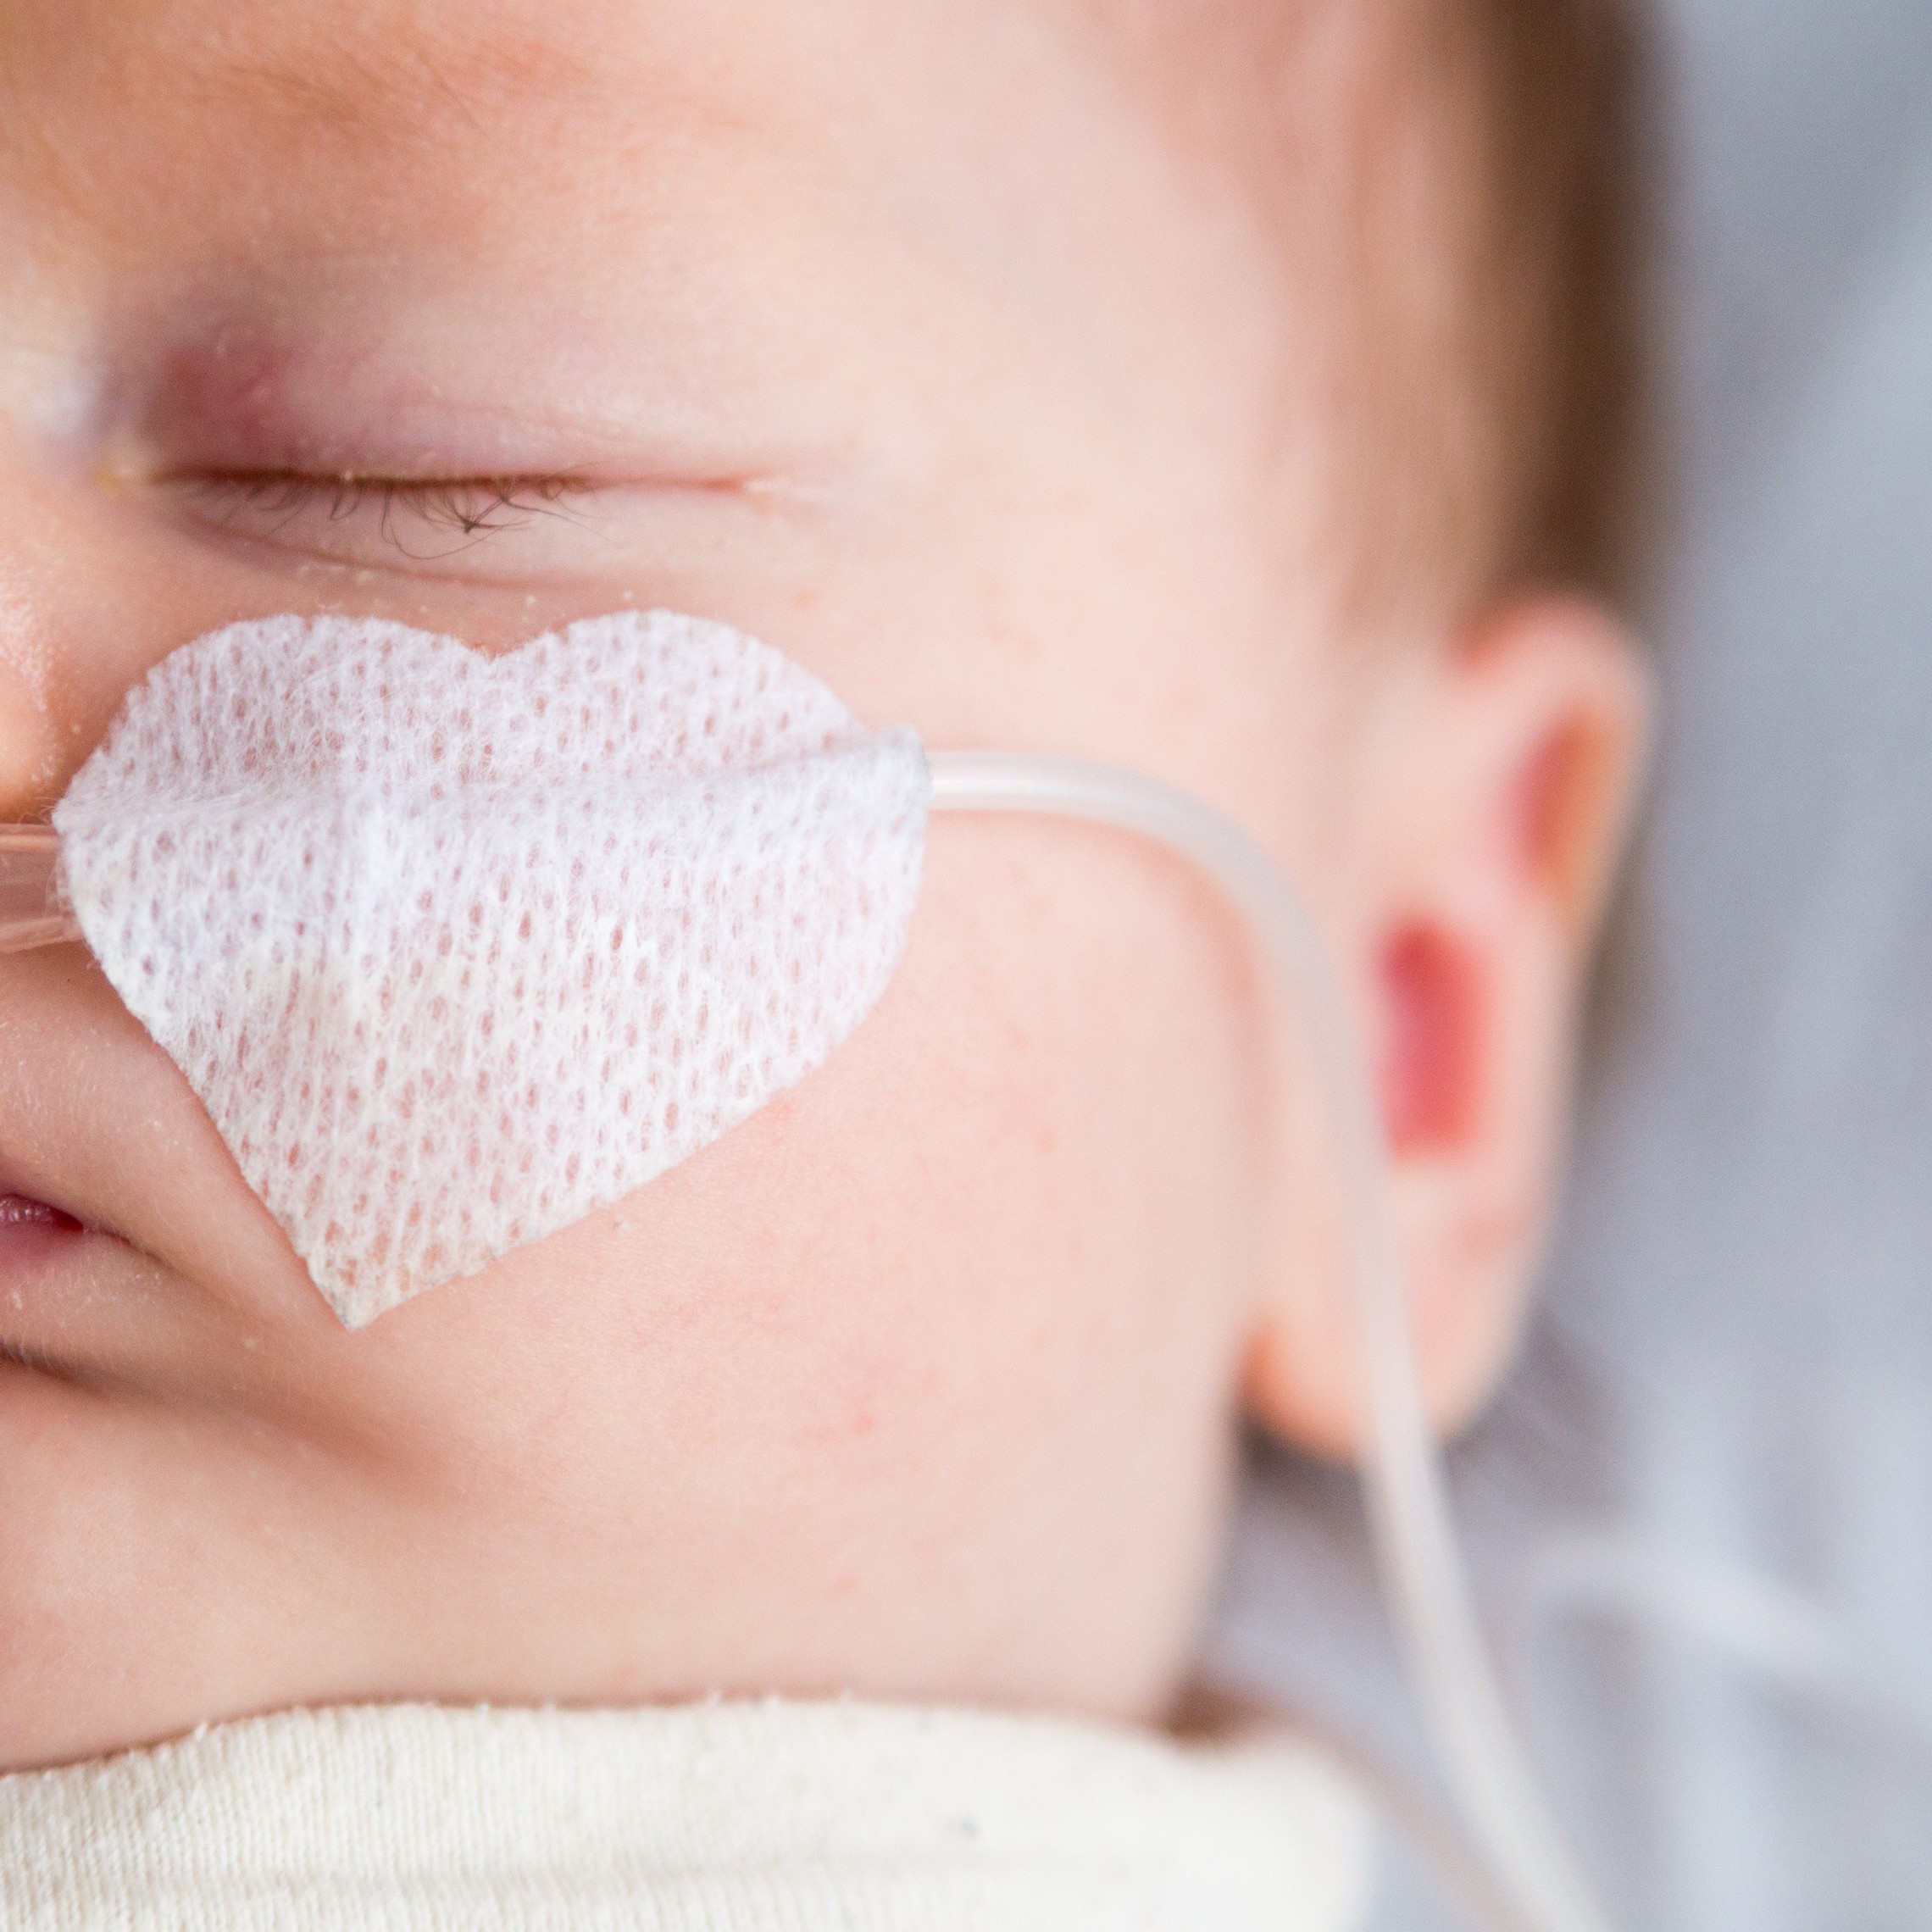 Baby Gordon receives oxygen from a nasal cannula